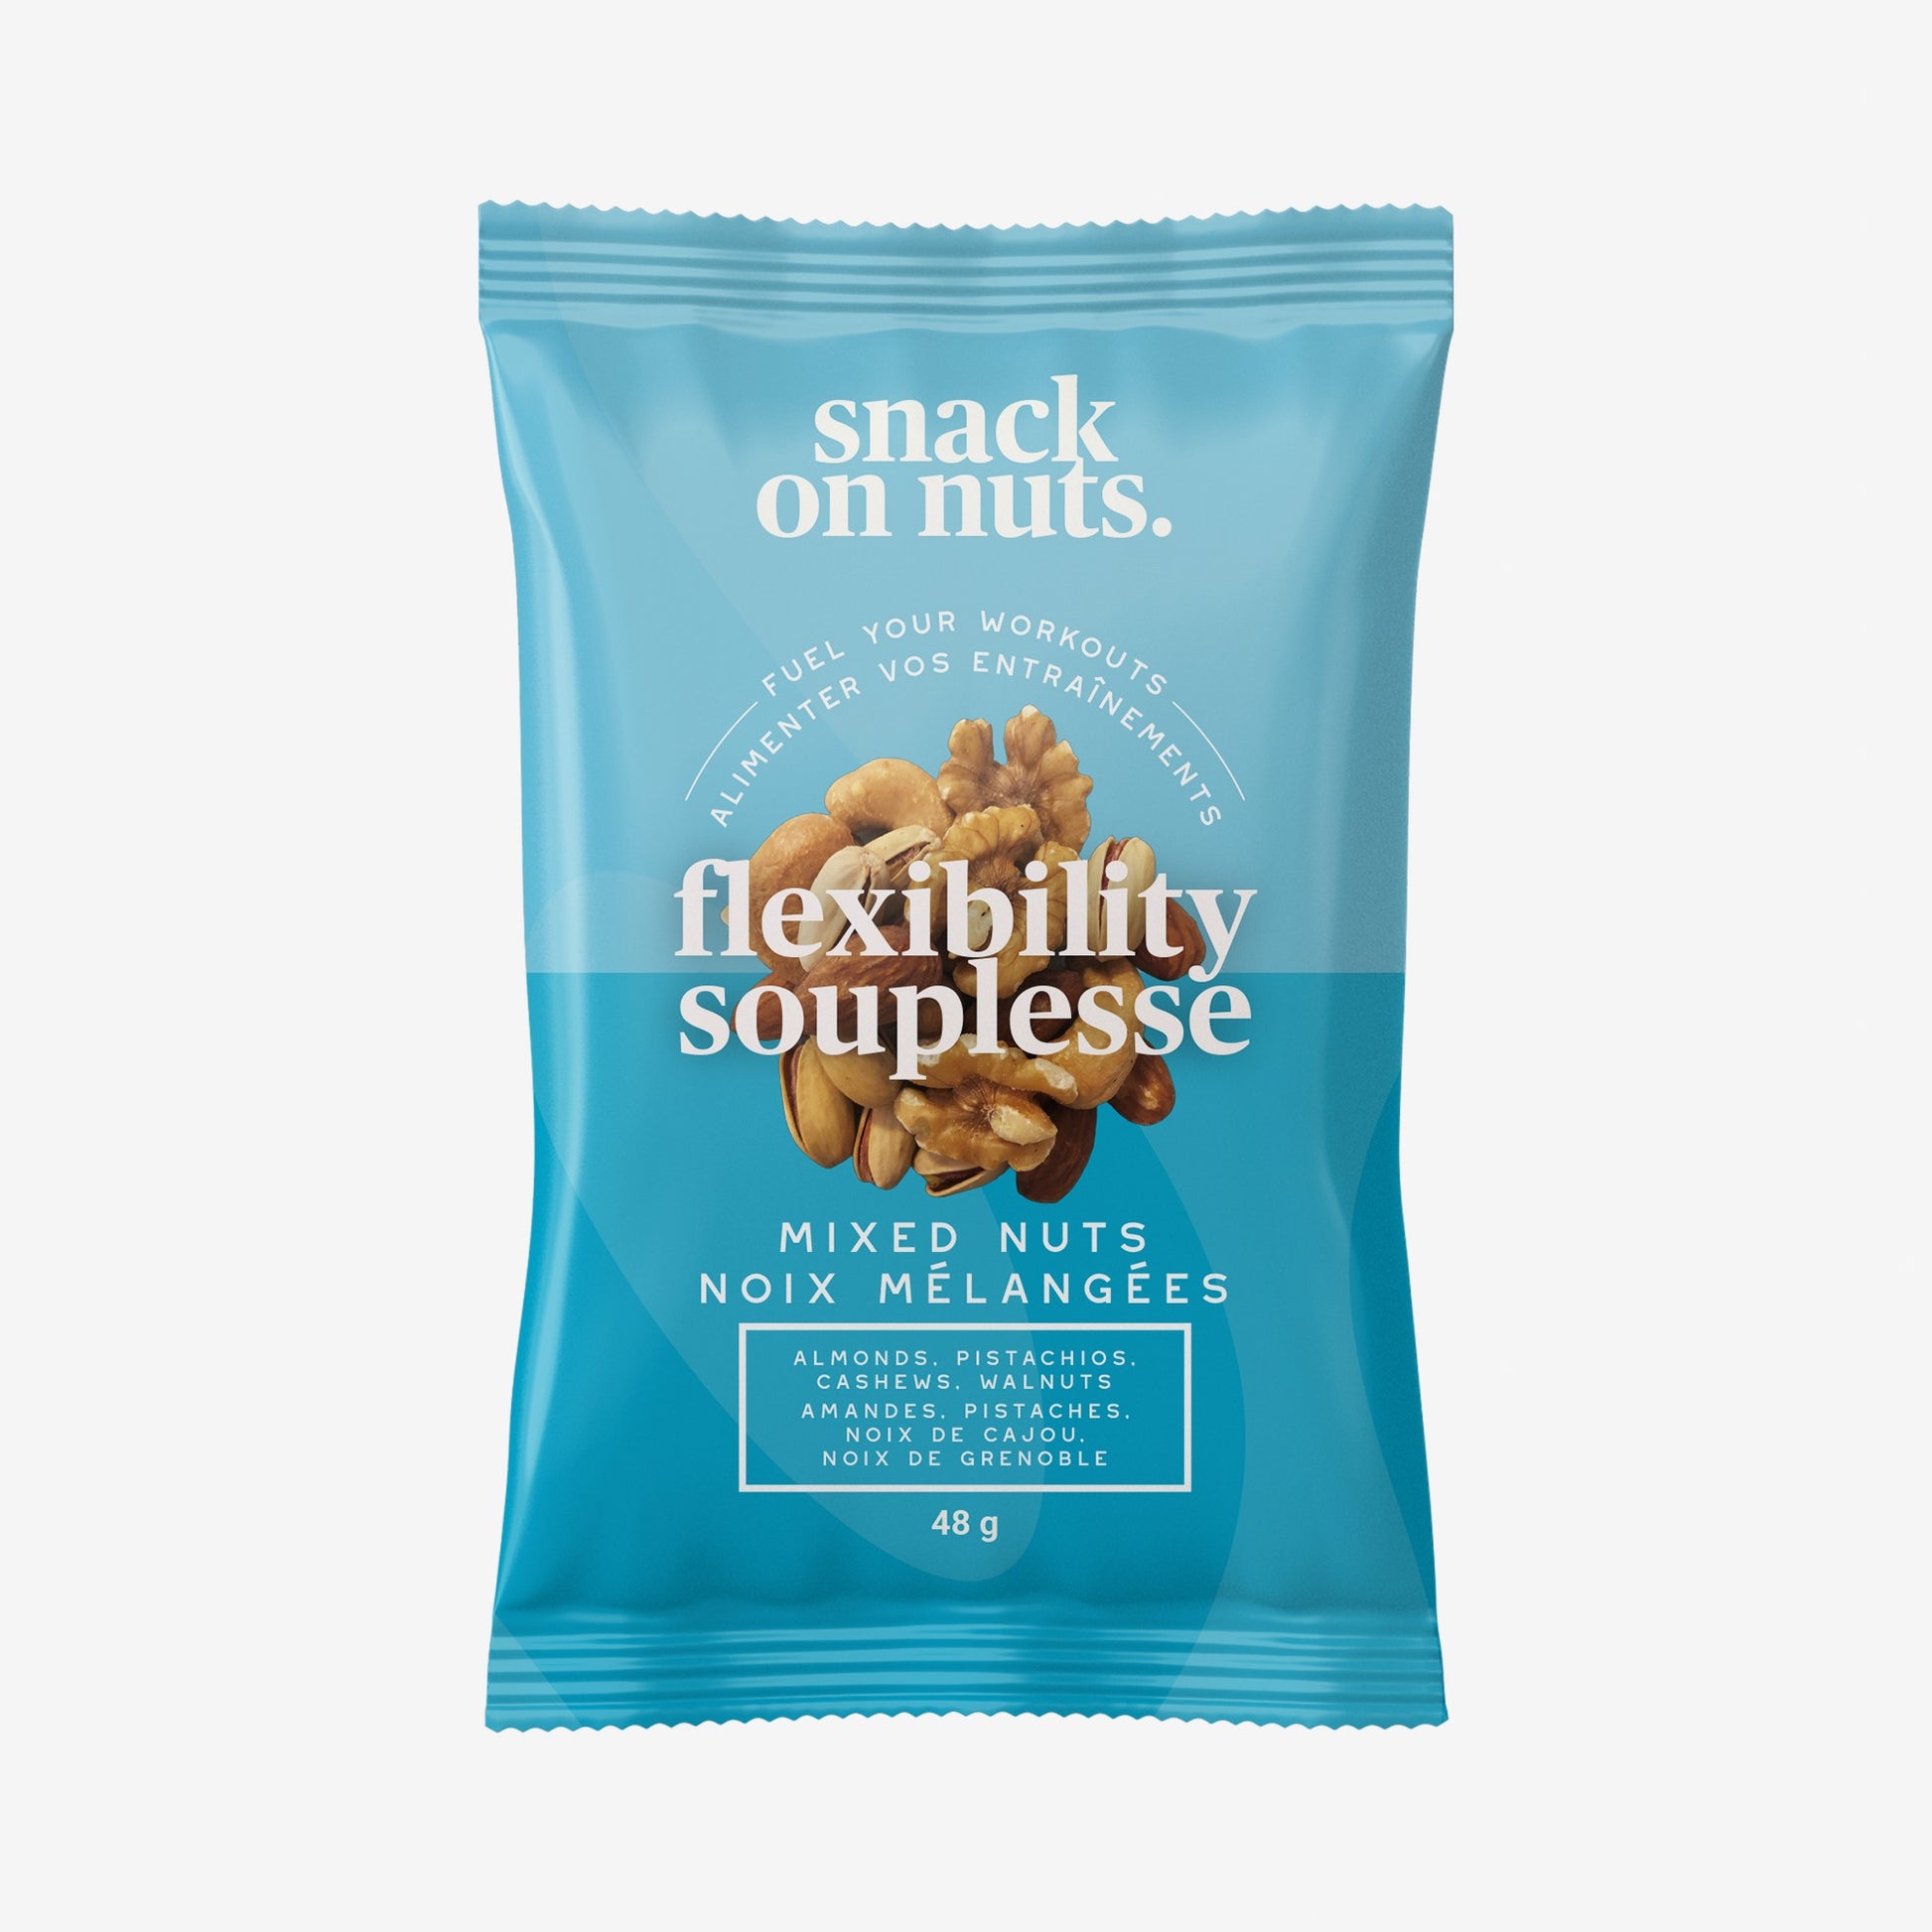 Snack On Nuts - Flexibility Mixed Nuts Single Pack (48g) - Easy Snacks: Roasted Almonds, Cashews, Pistachios, and Raw Walnuts